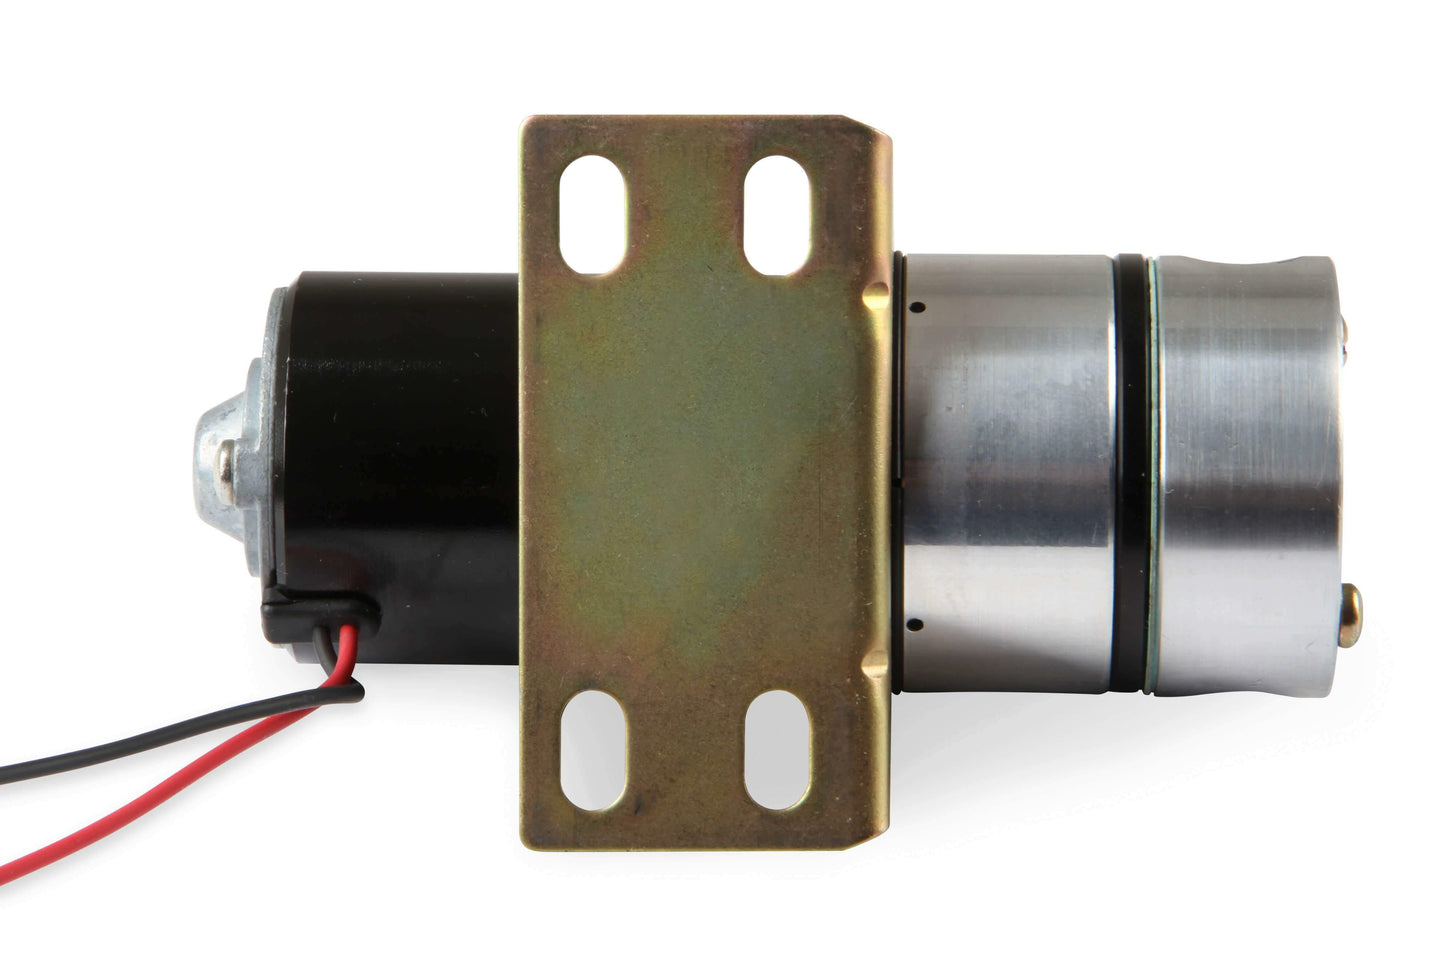 Mallory Model 140 Fuel Pump with Non-Bypass Regulator - 29209